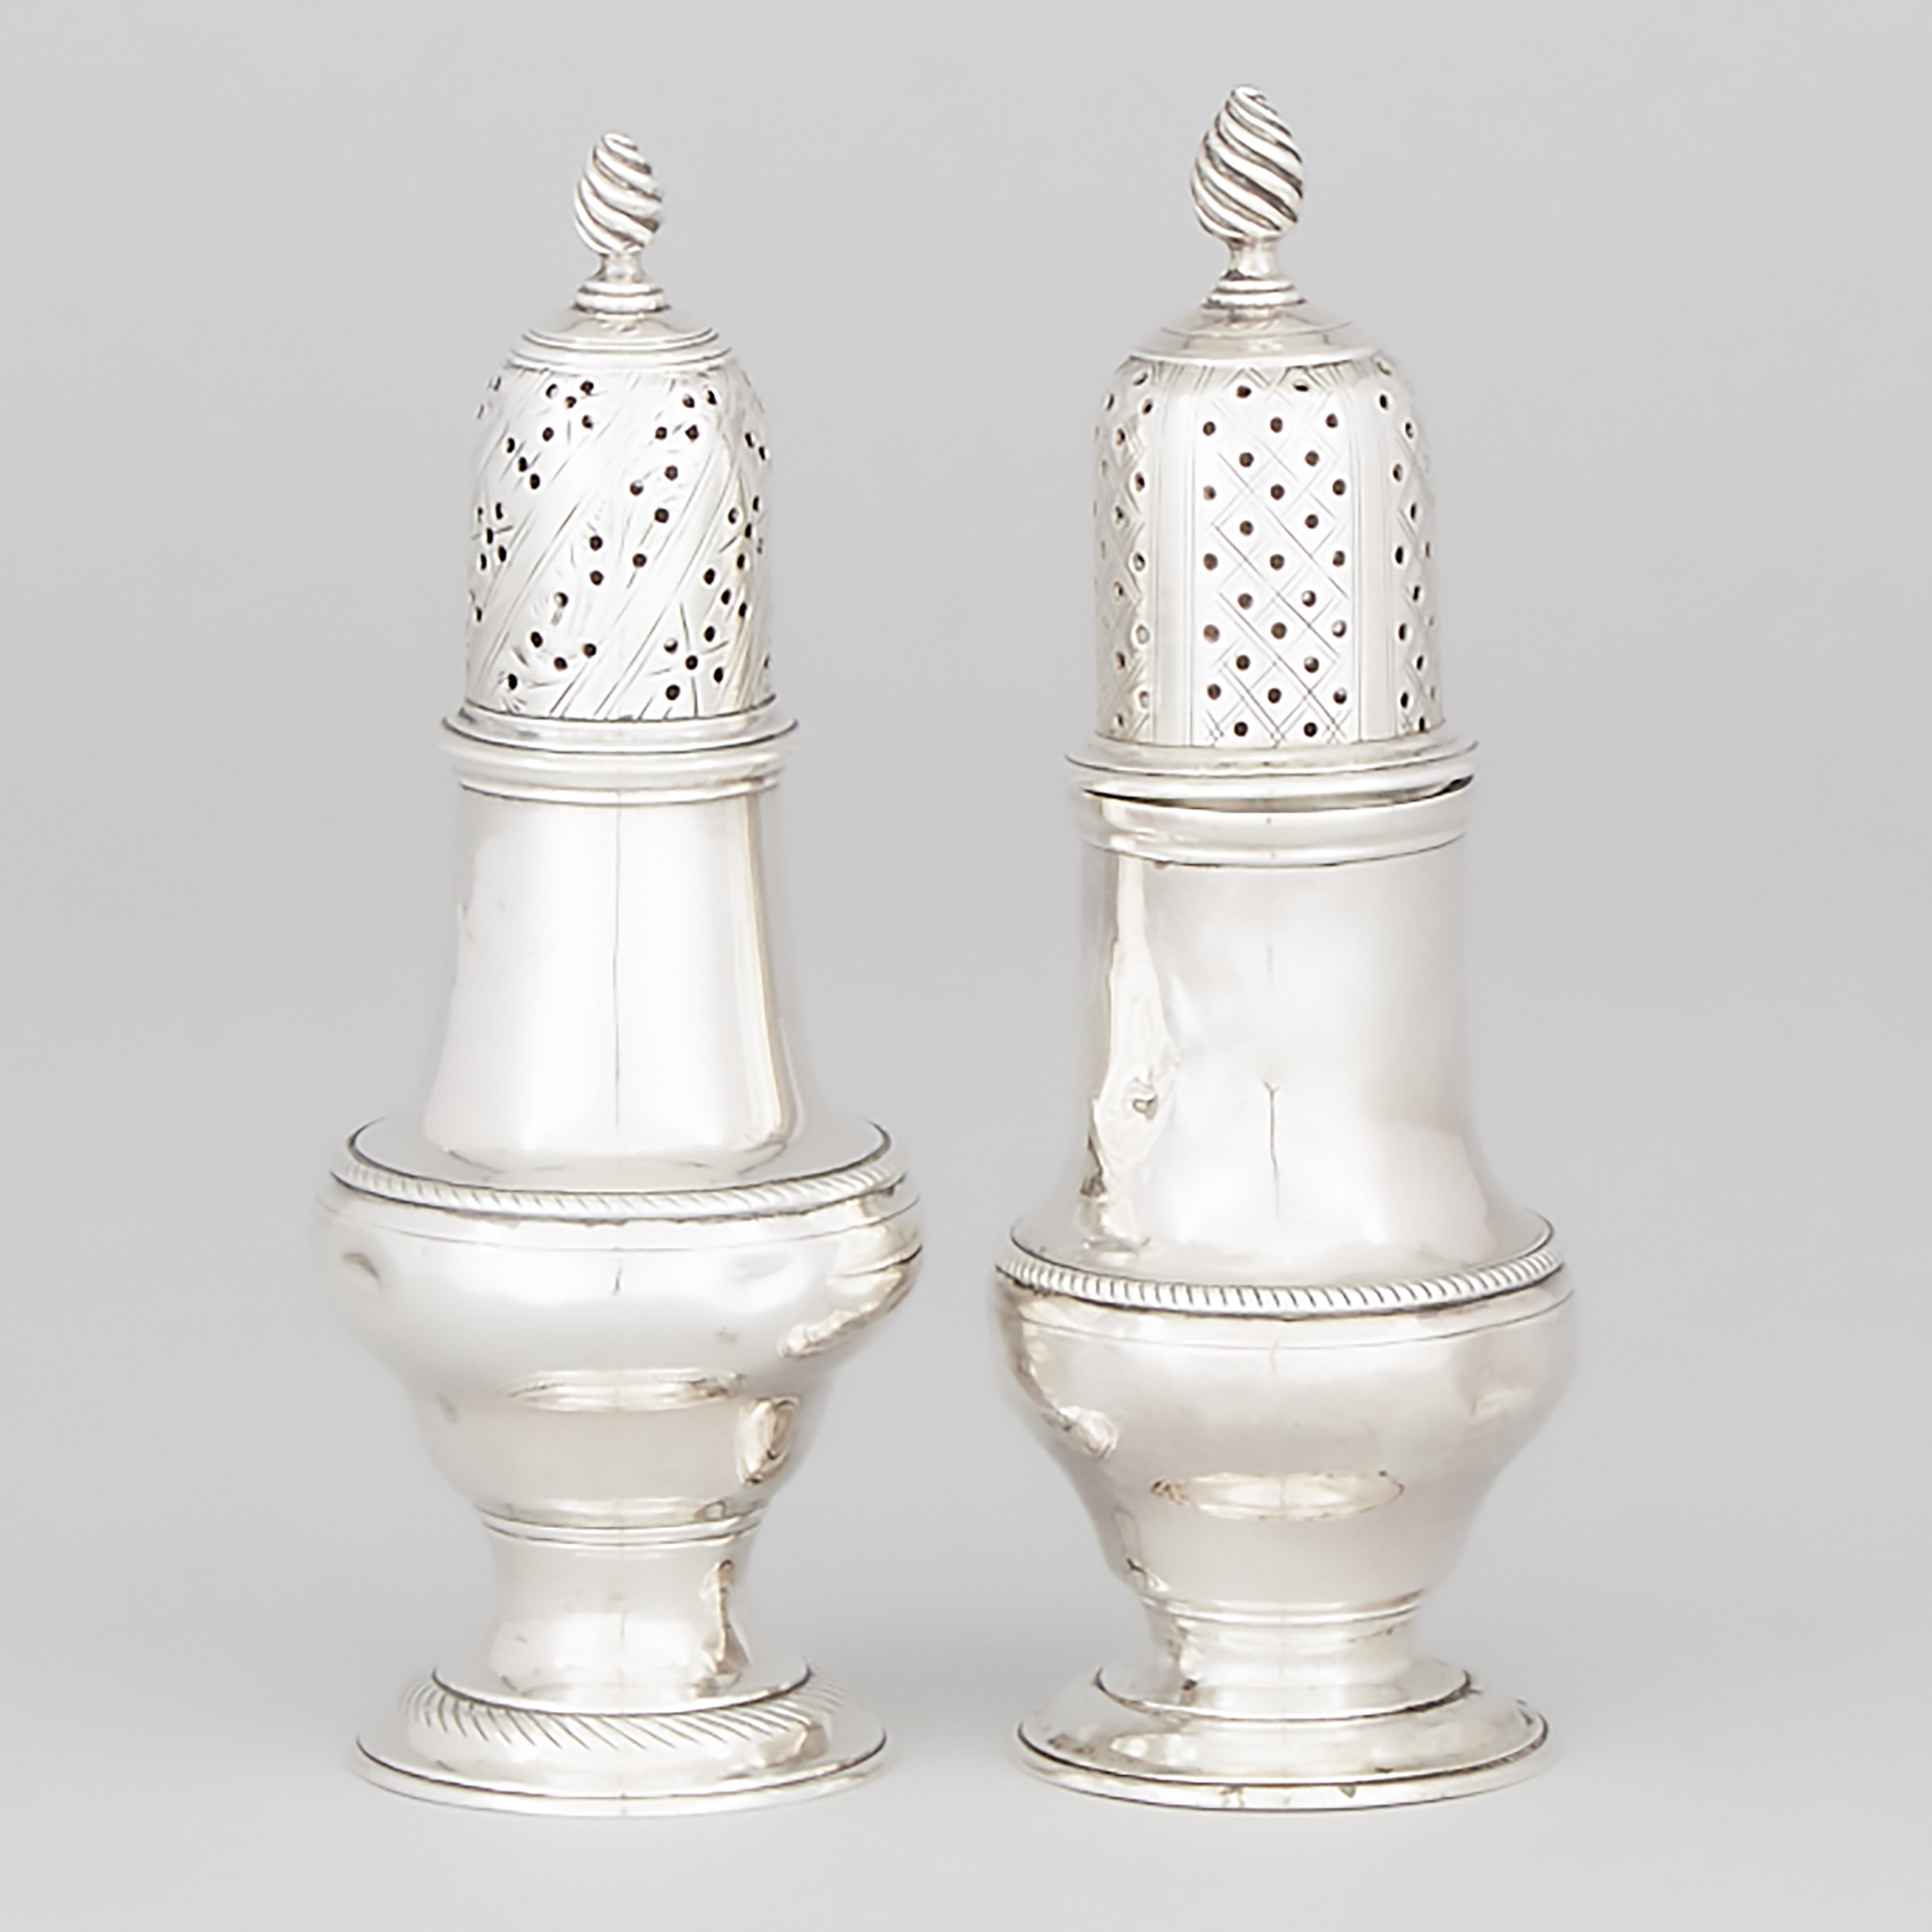 Two George III Silver Baluster Casters, Richard Palmer I, London, 1767 and Thomas Daniell and John Delmester, 1774